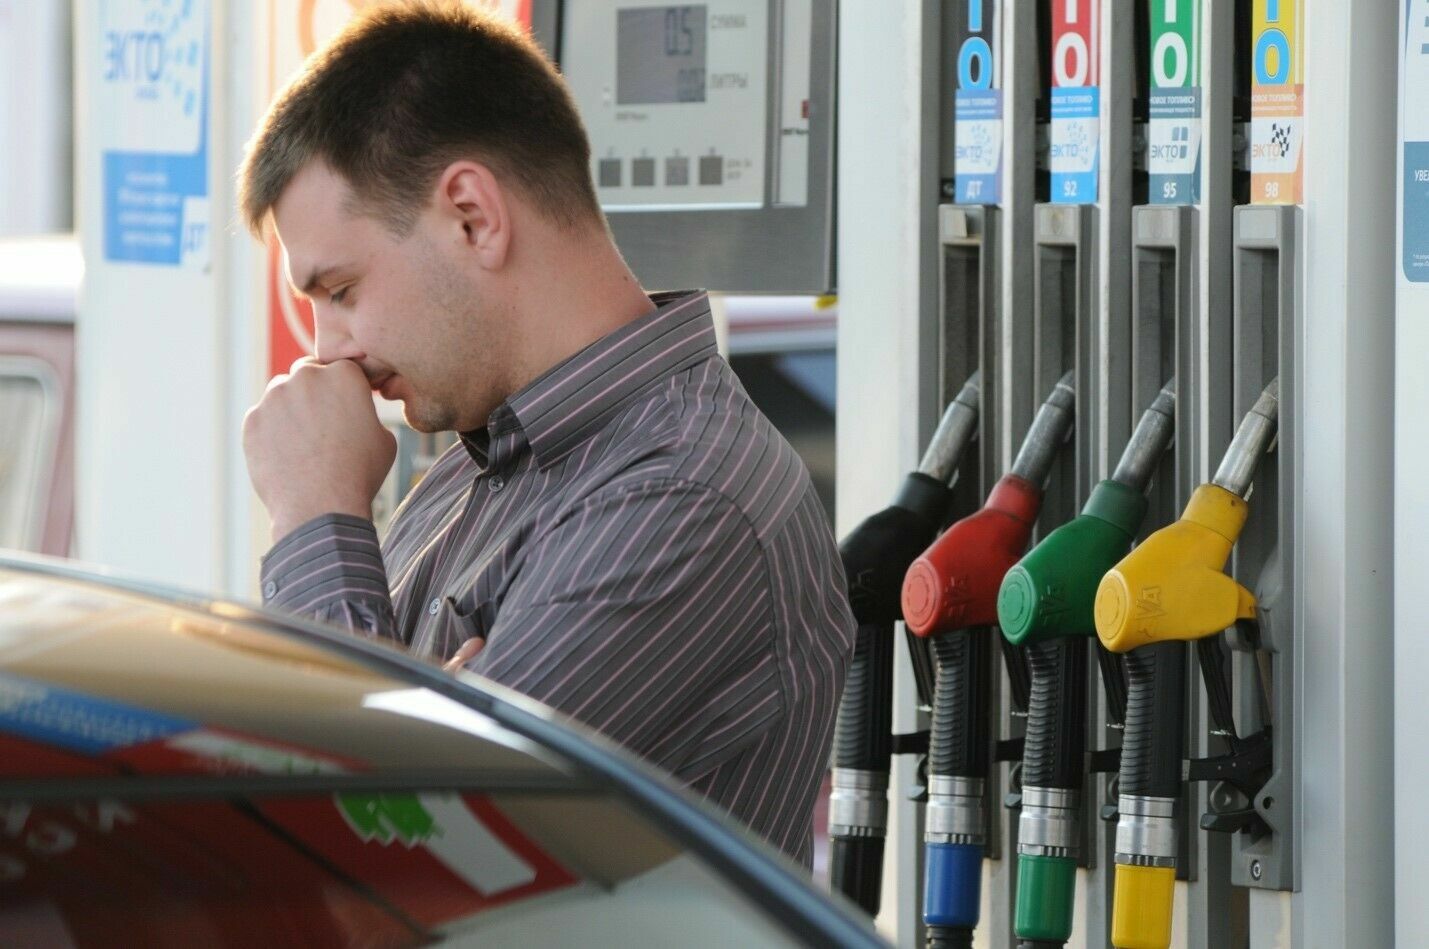 The Ministry of Economy predicted a rise in the price of gasoline and tobacco by the end of 2021